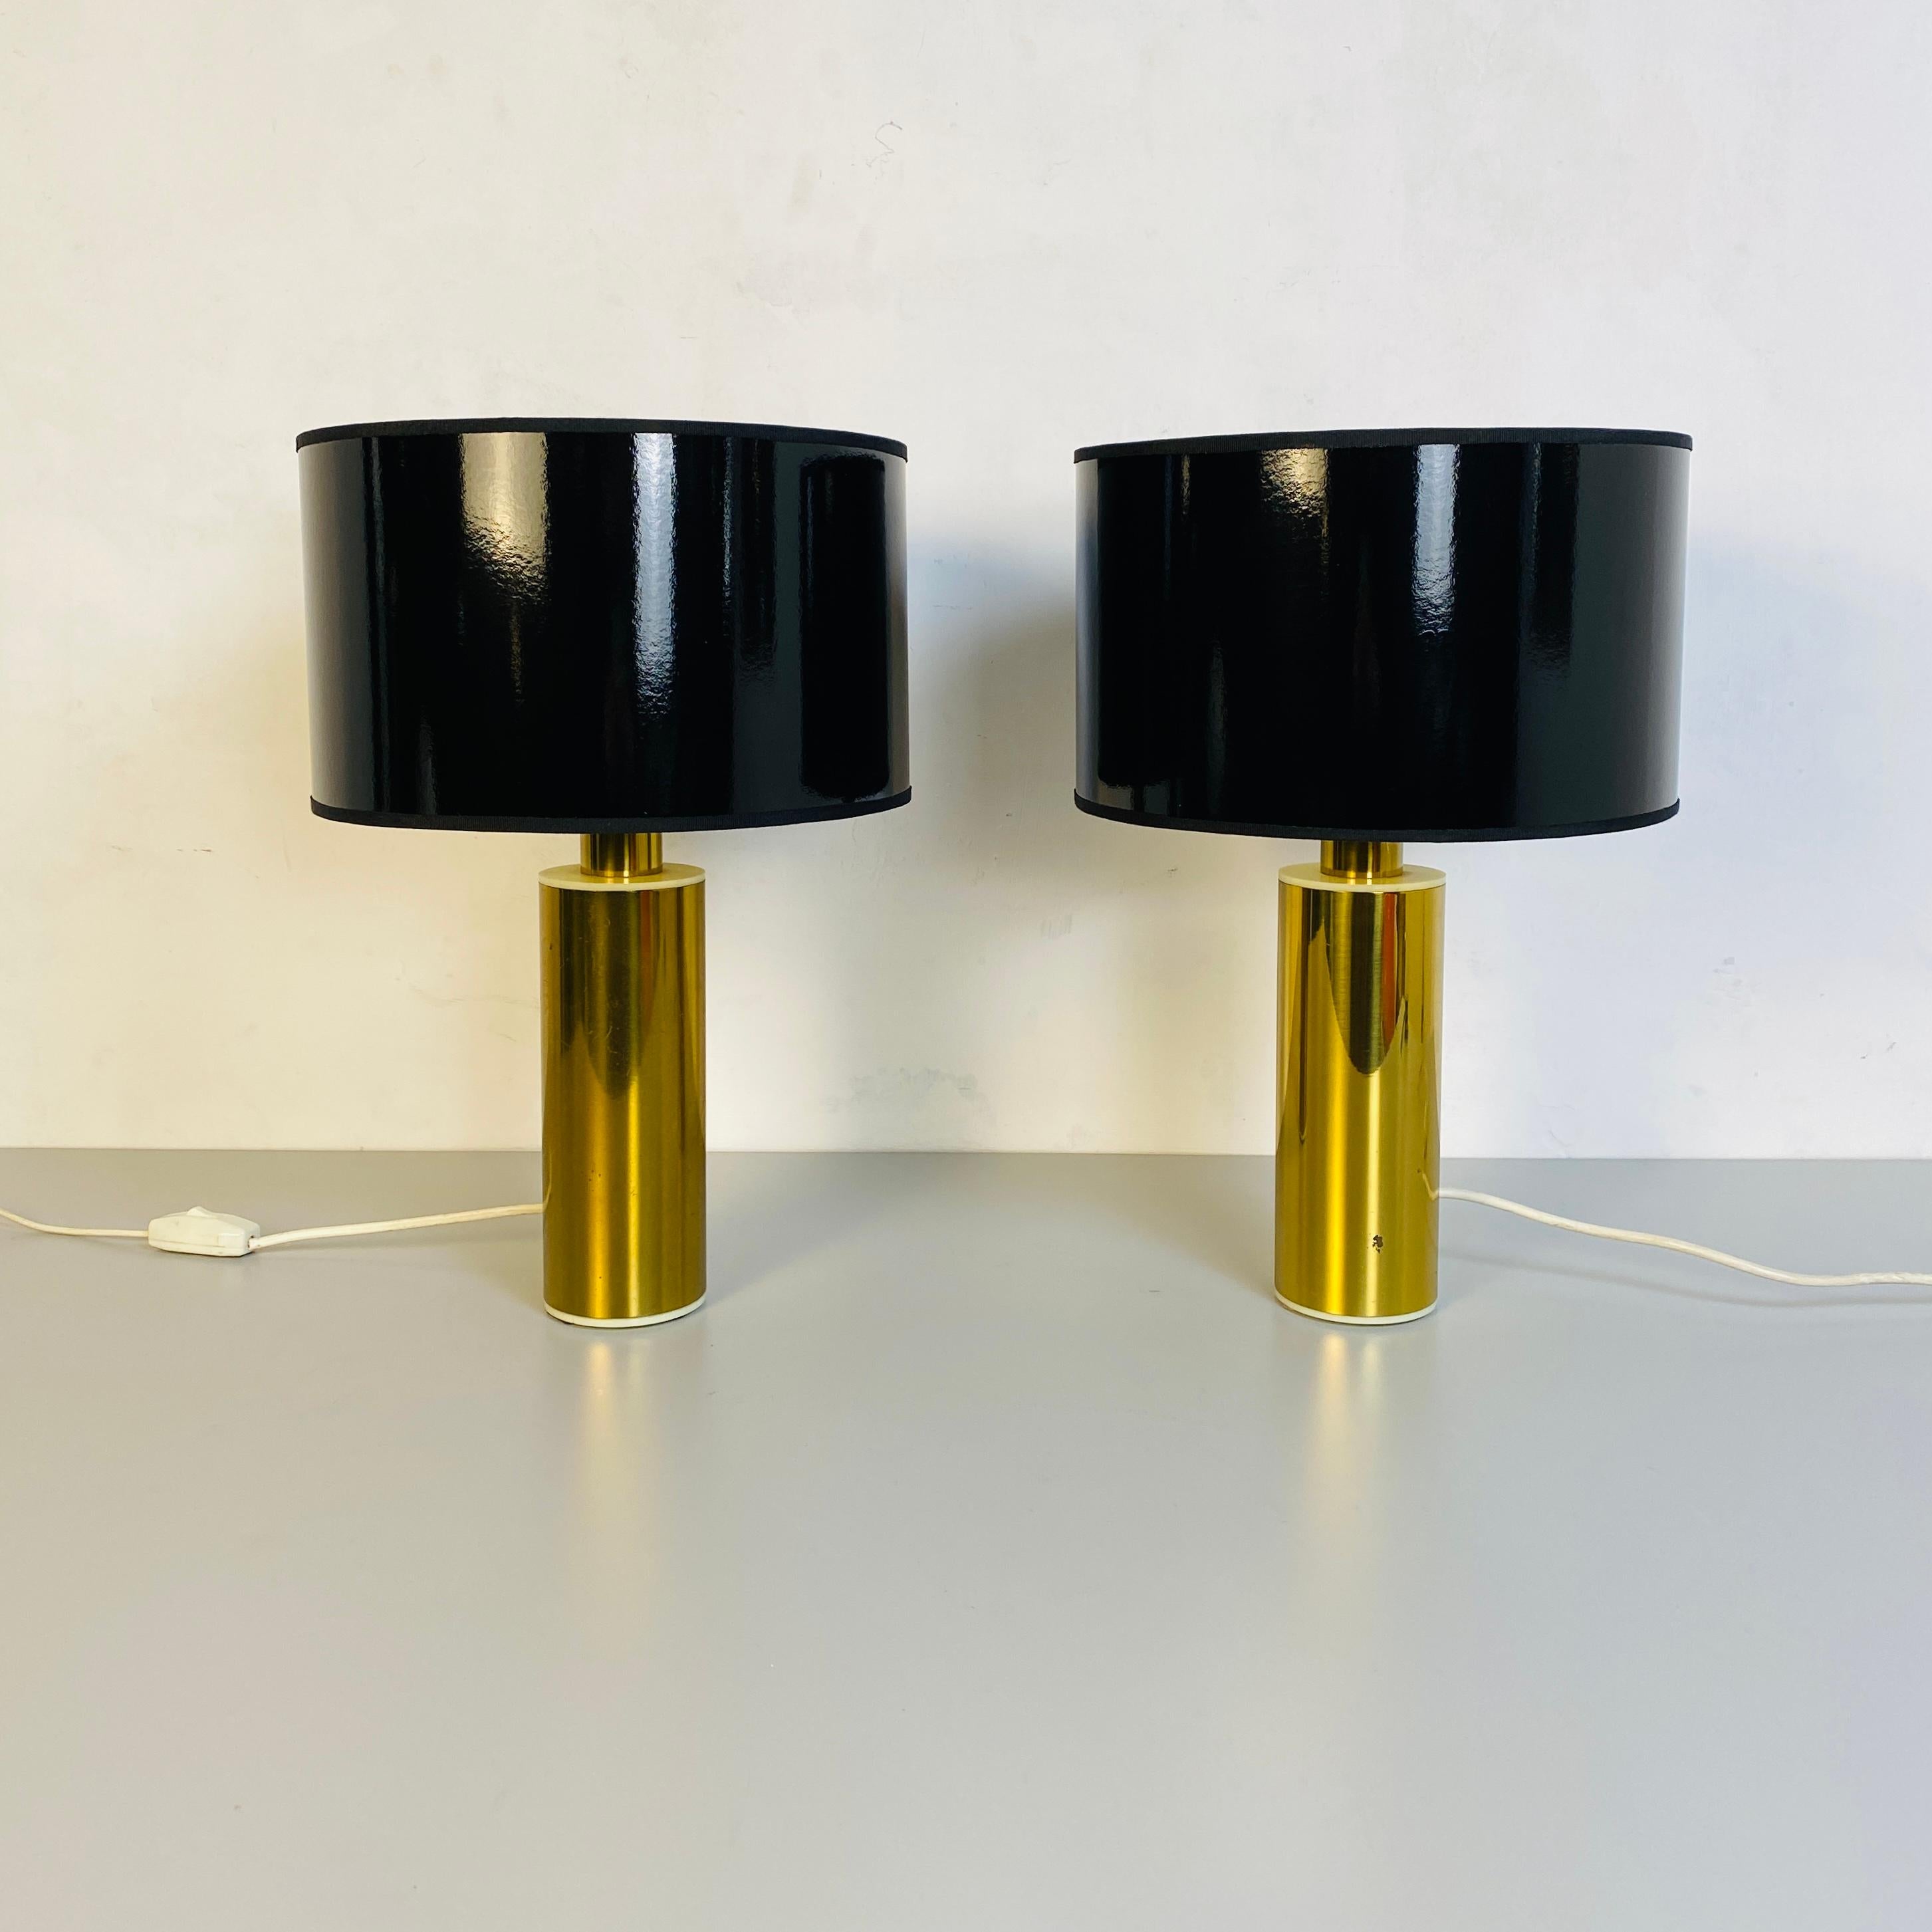 Late 20th Century Italian Mid-Century Modern Brass Table Lamps with Cylindrical Lampshade, 1970s